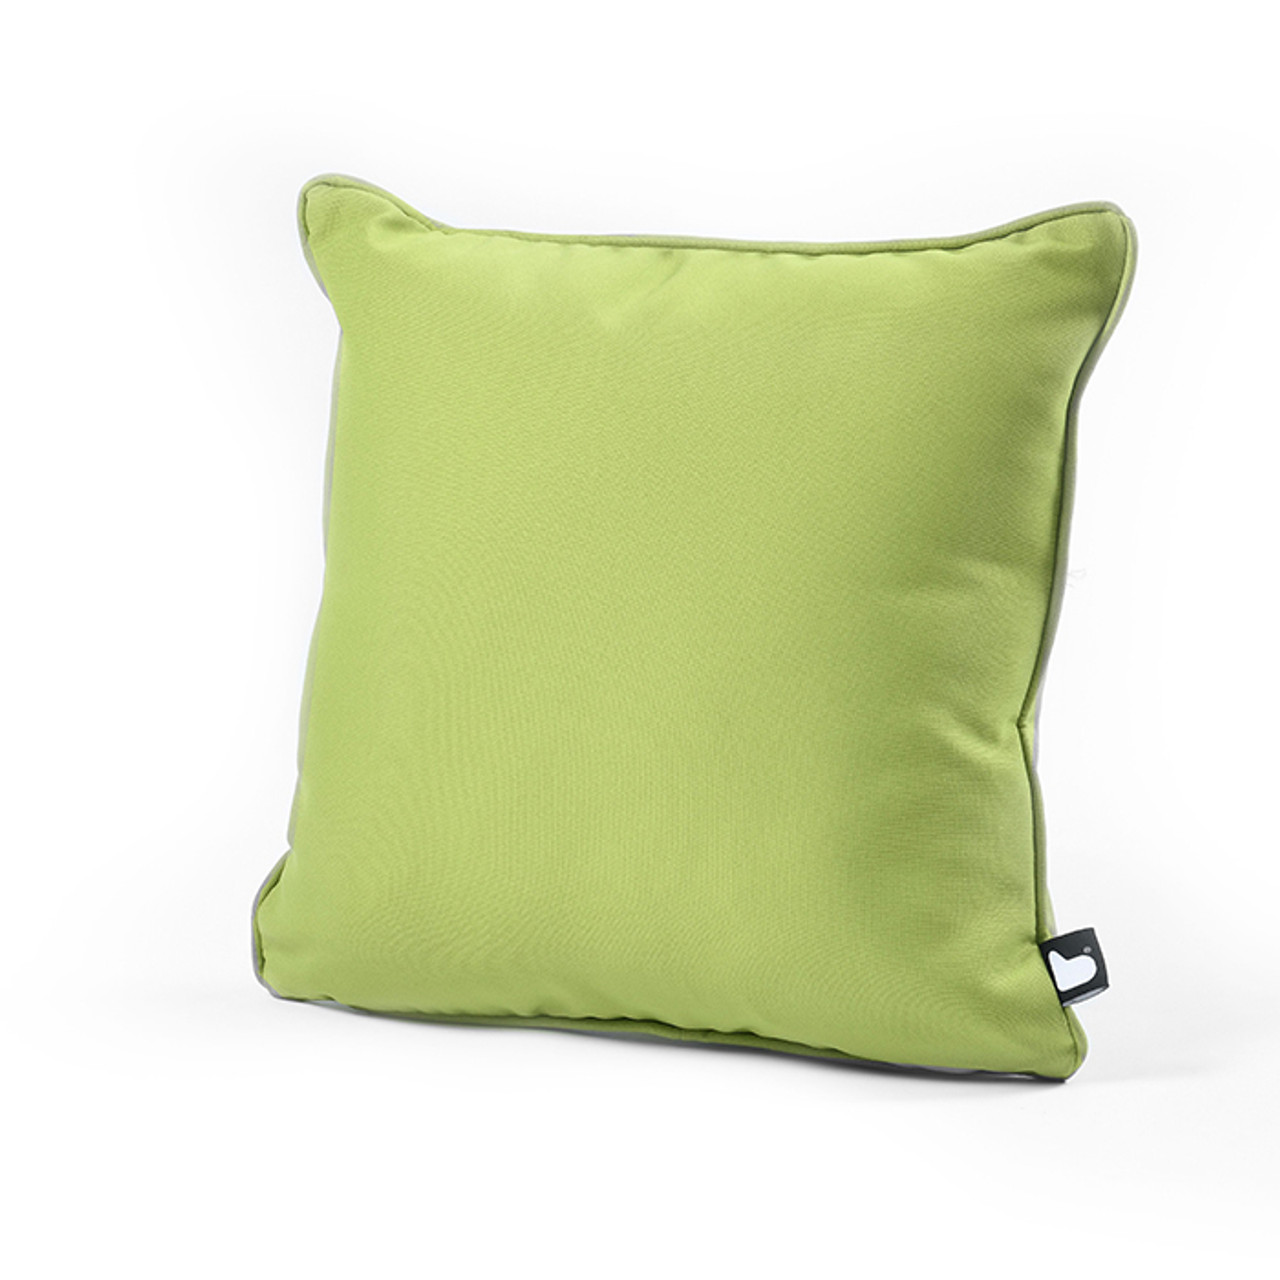 B-Bag Outdoor Cushion Olive- 50 x 50*instore